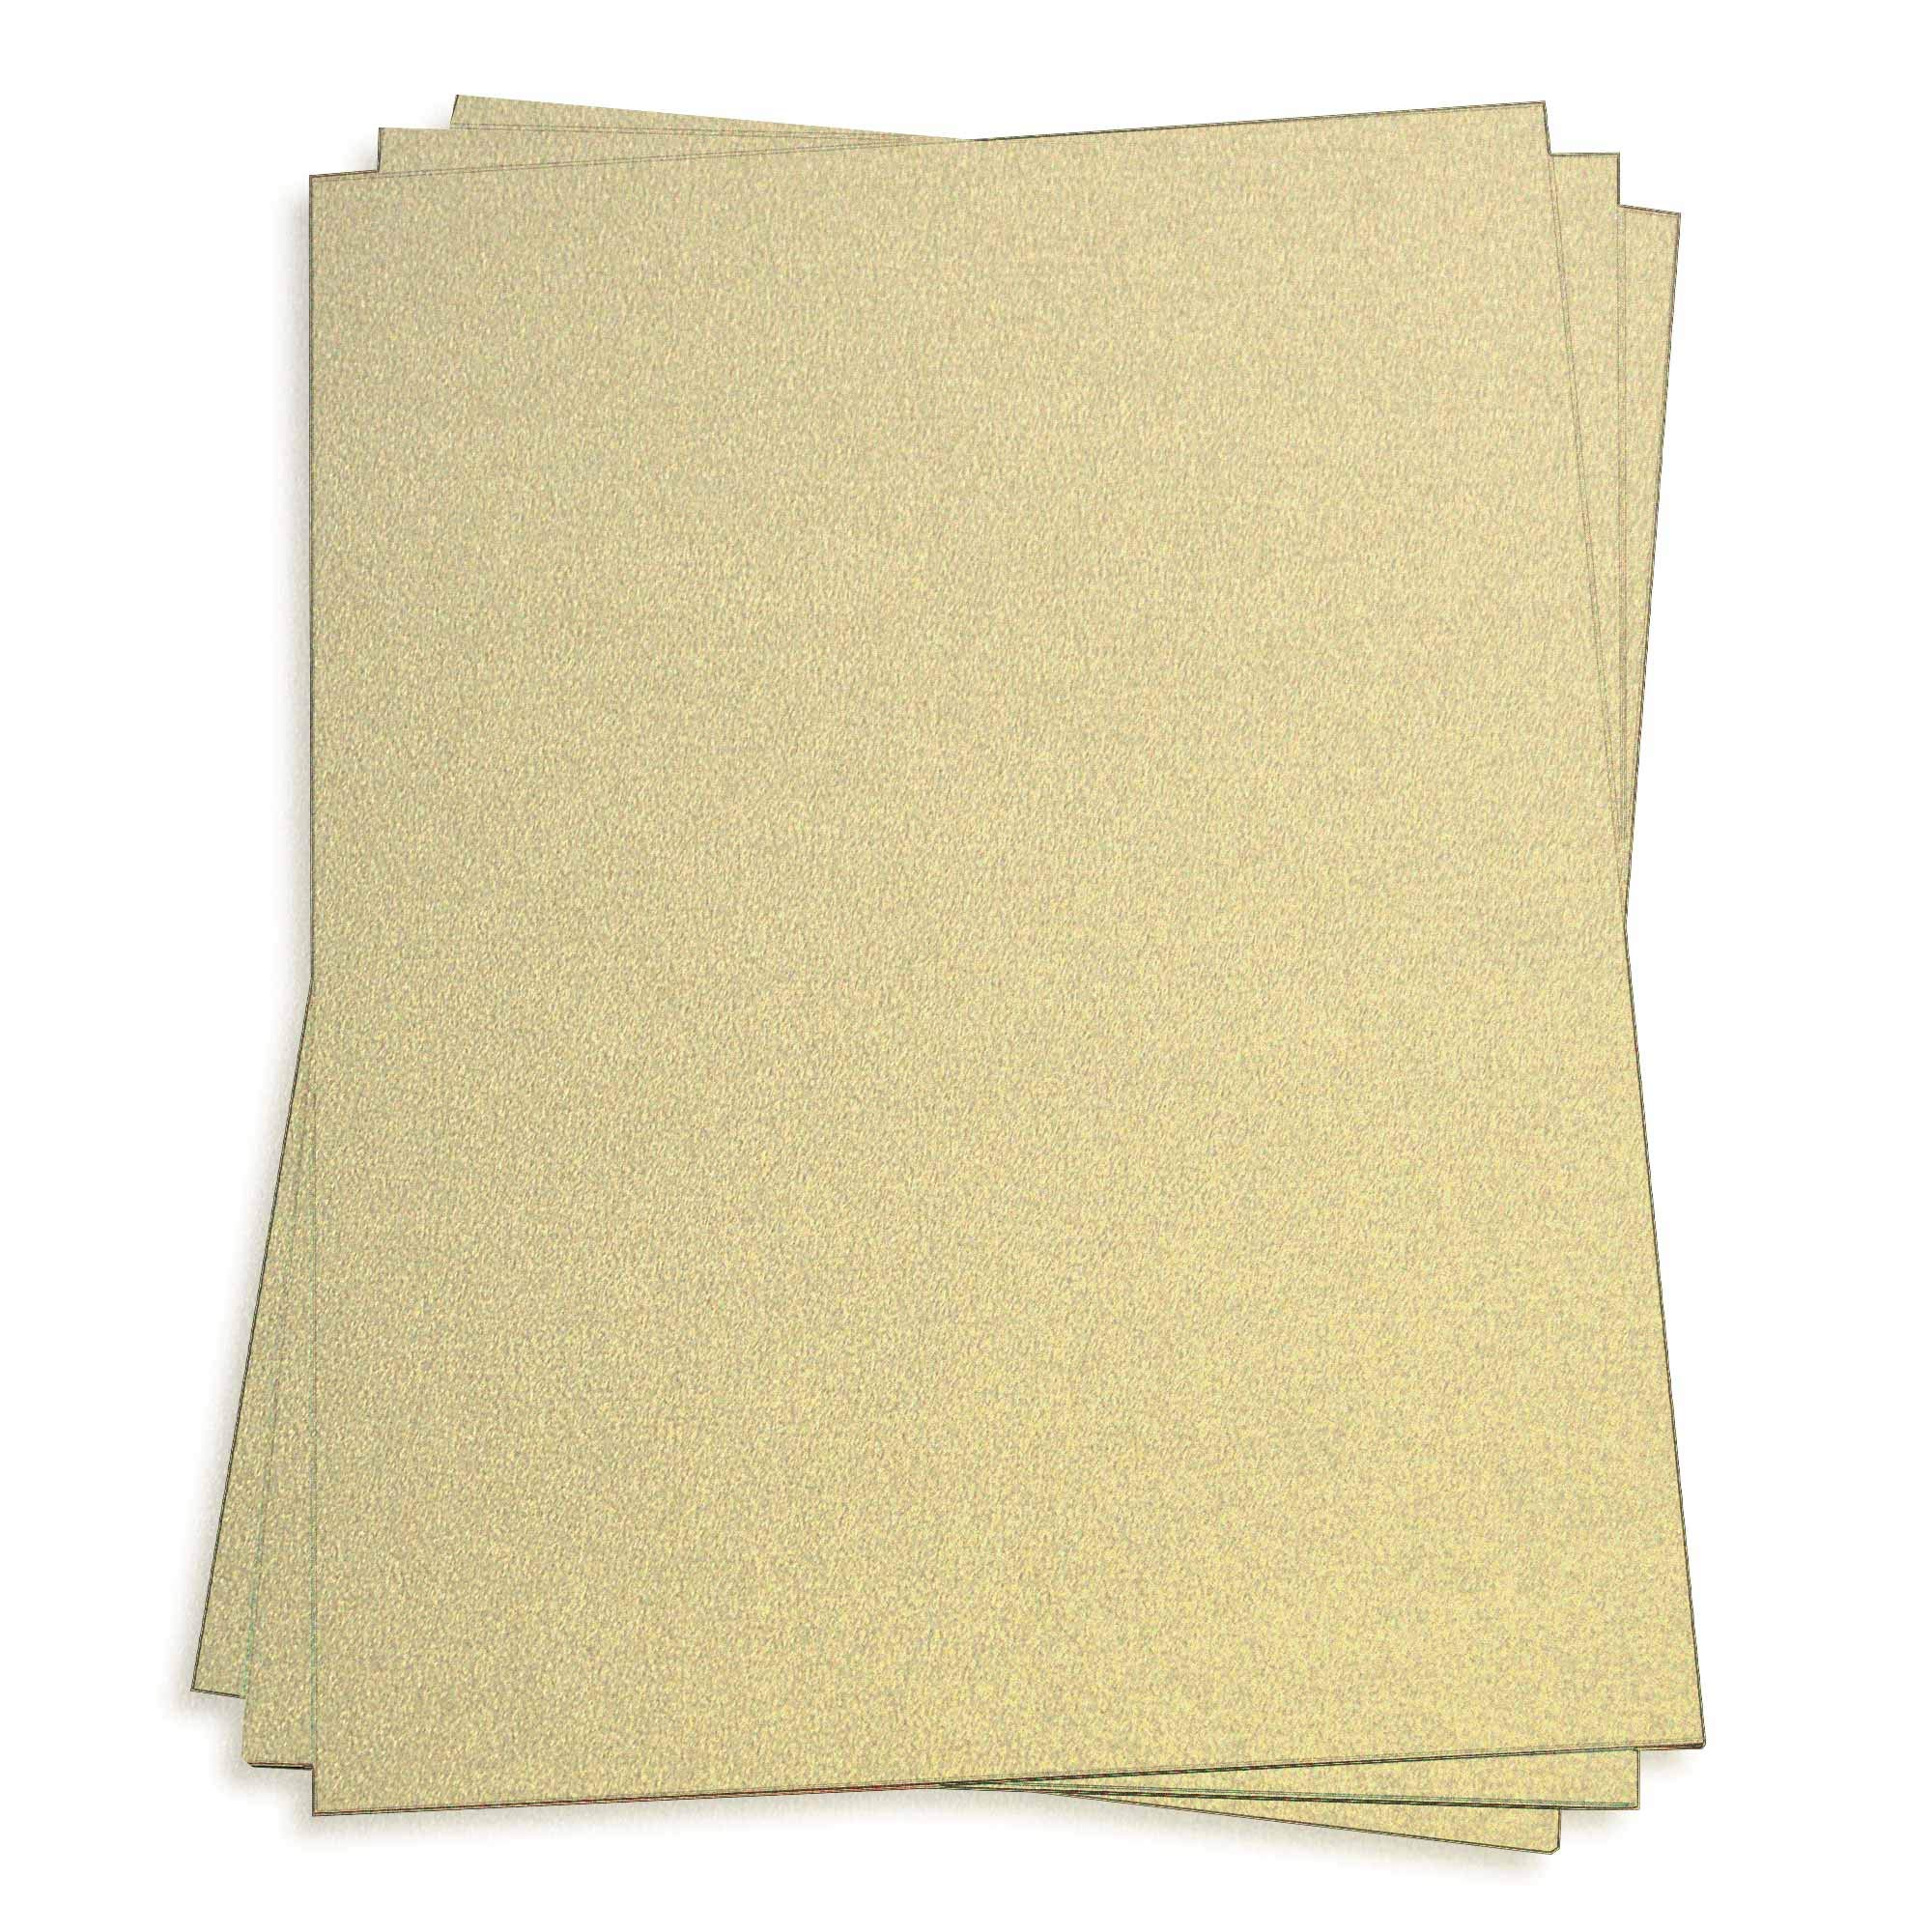 Gold Leaf Card Stock - 27.5 x 39.37 Curious Metallics 92lb Cover, 25 Pack